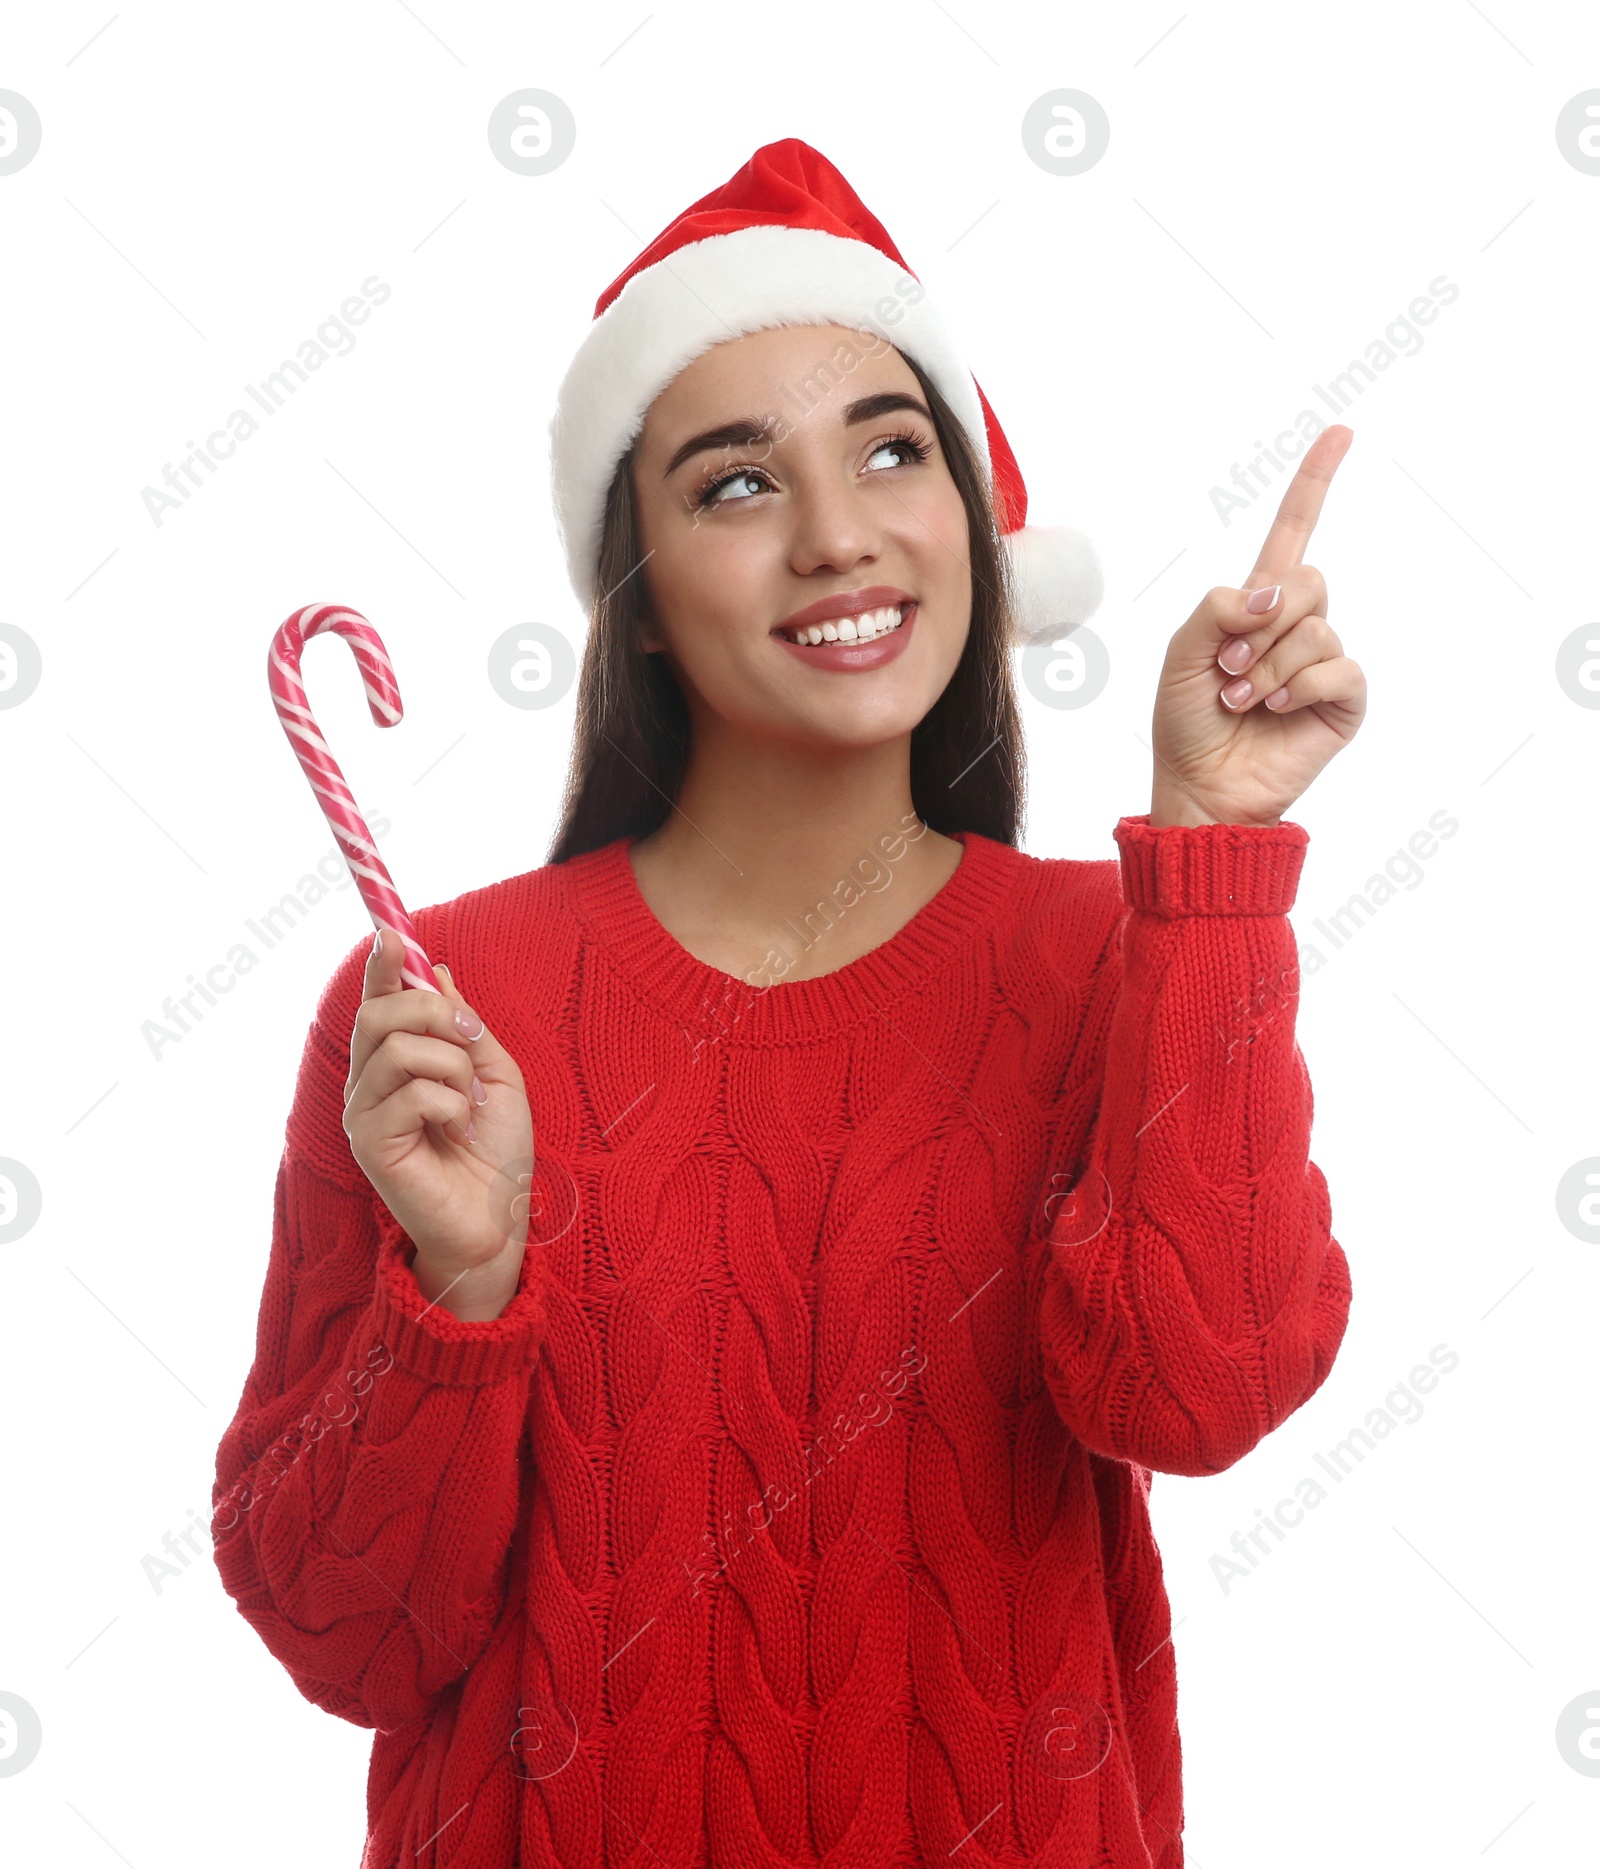 Photo of Young woman in red sweater and Santa hat with candy cane on white background. Celebrating Christmas